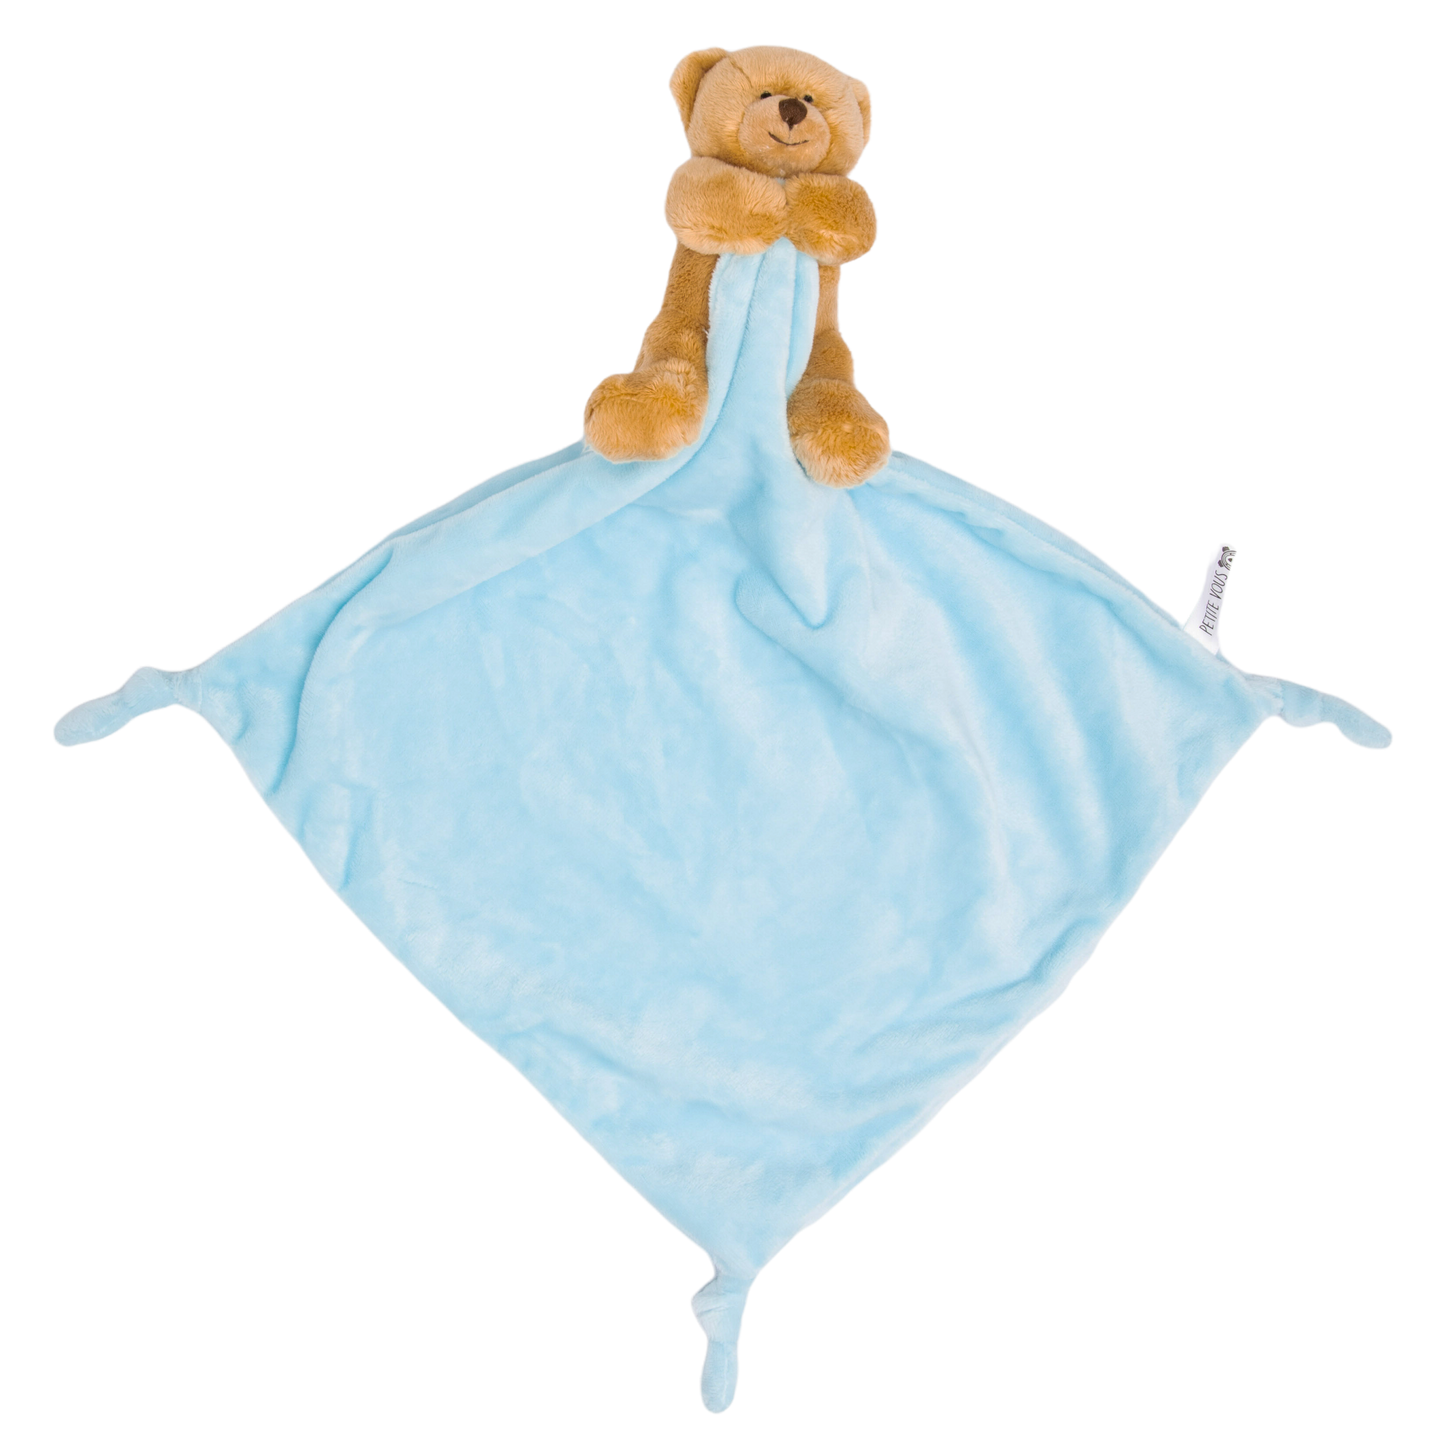 Petite Vous Bailey the Bear Mini Toy & Comfort Blanket